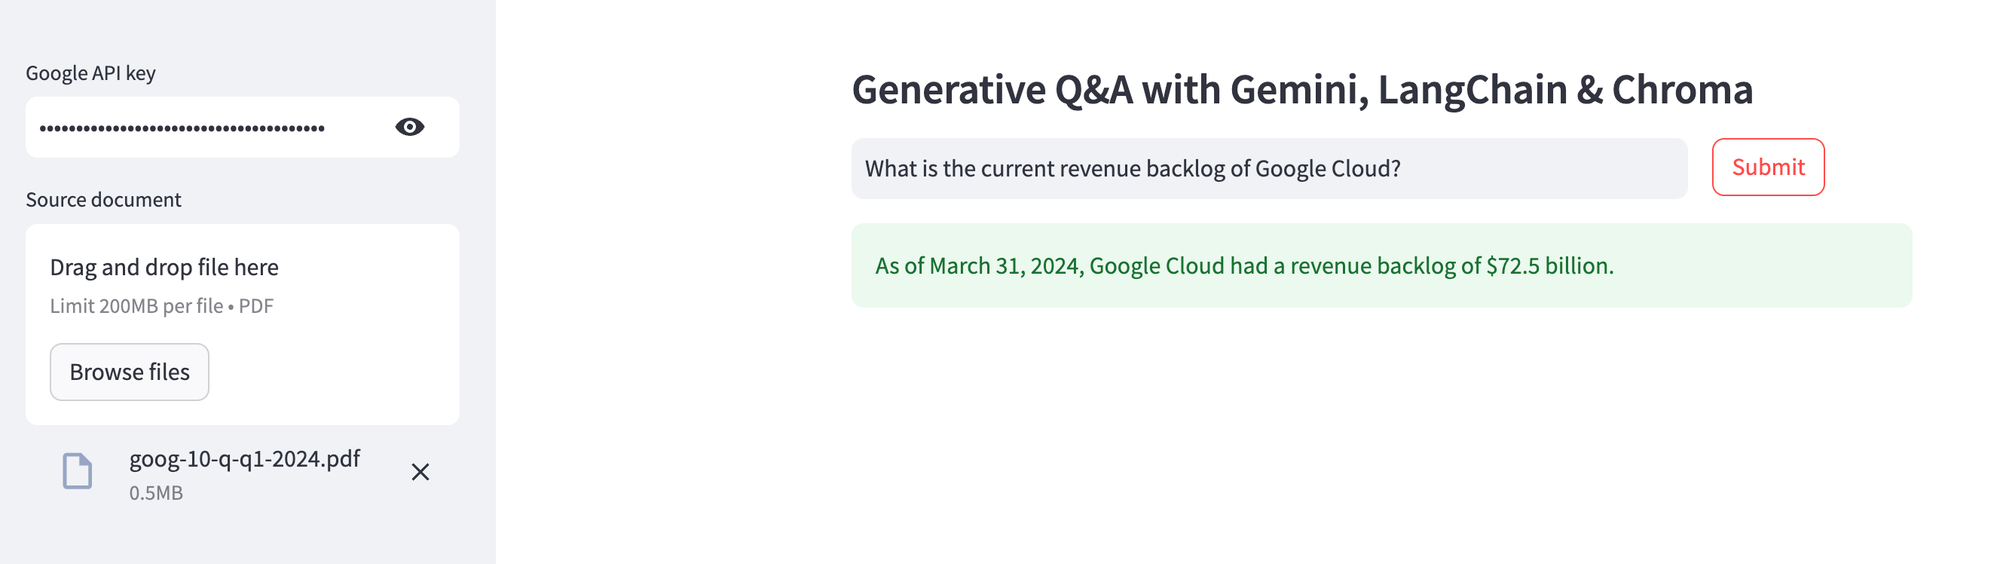 Generative Q&A with LangChain, Gemini and Chroma